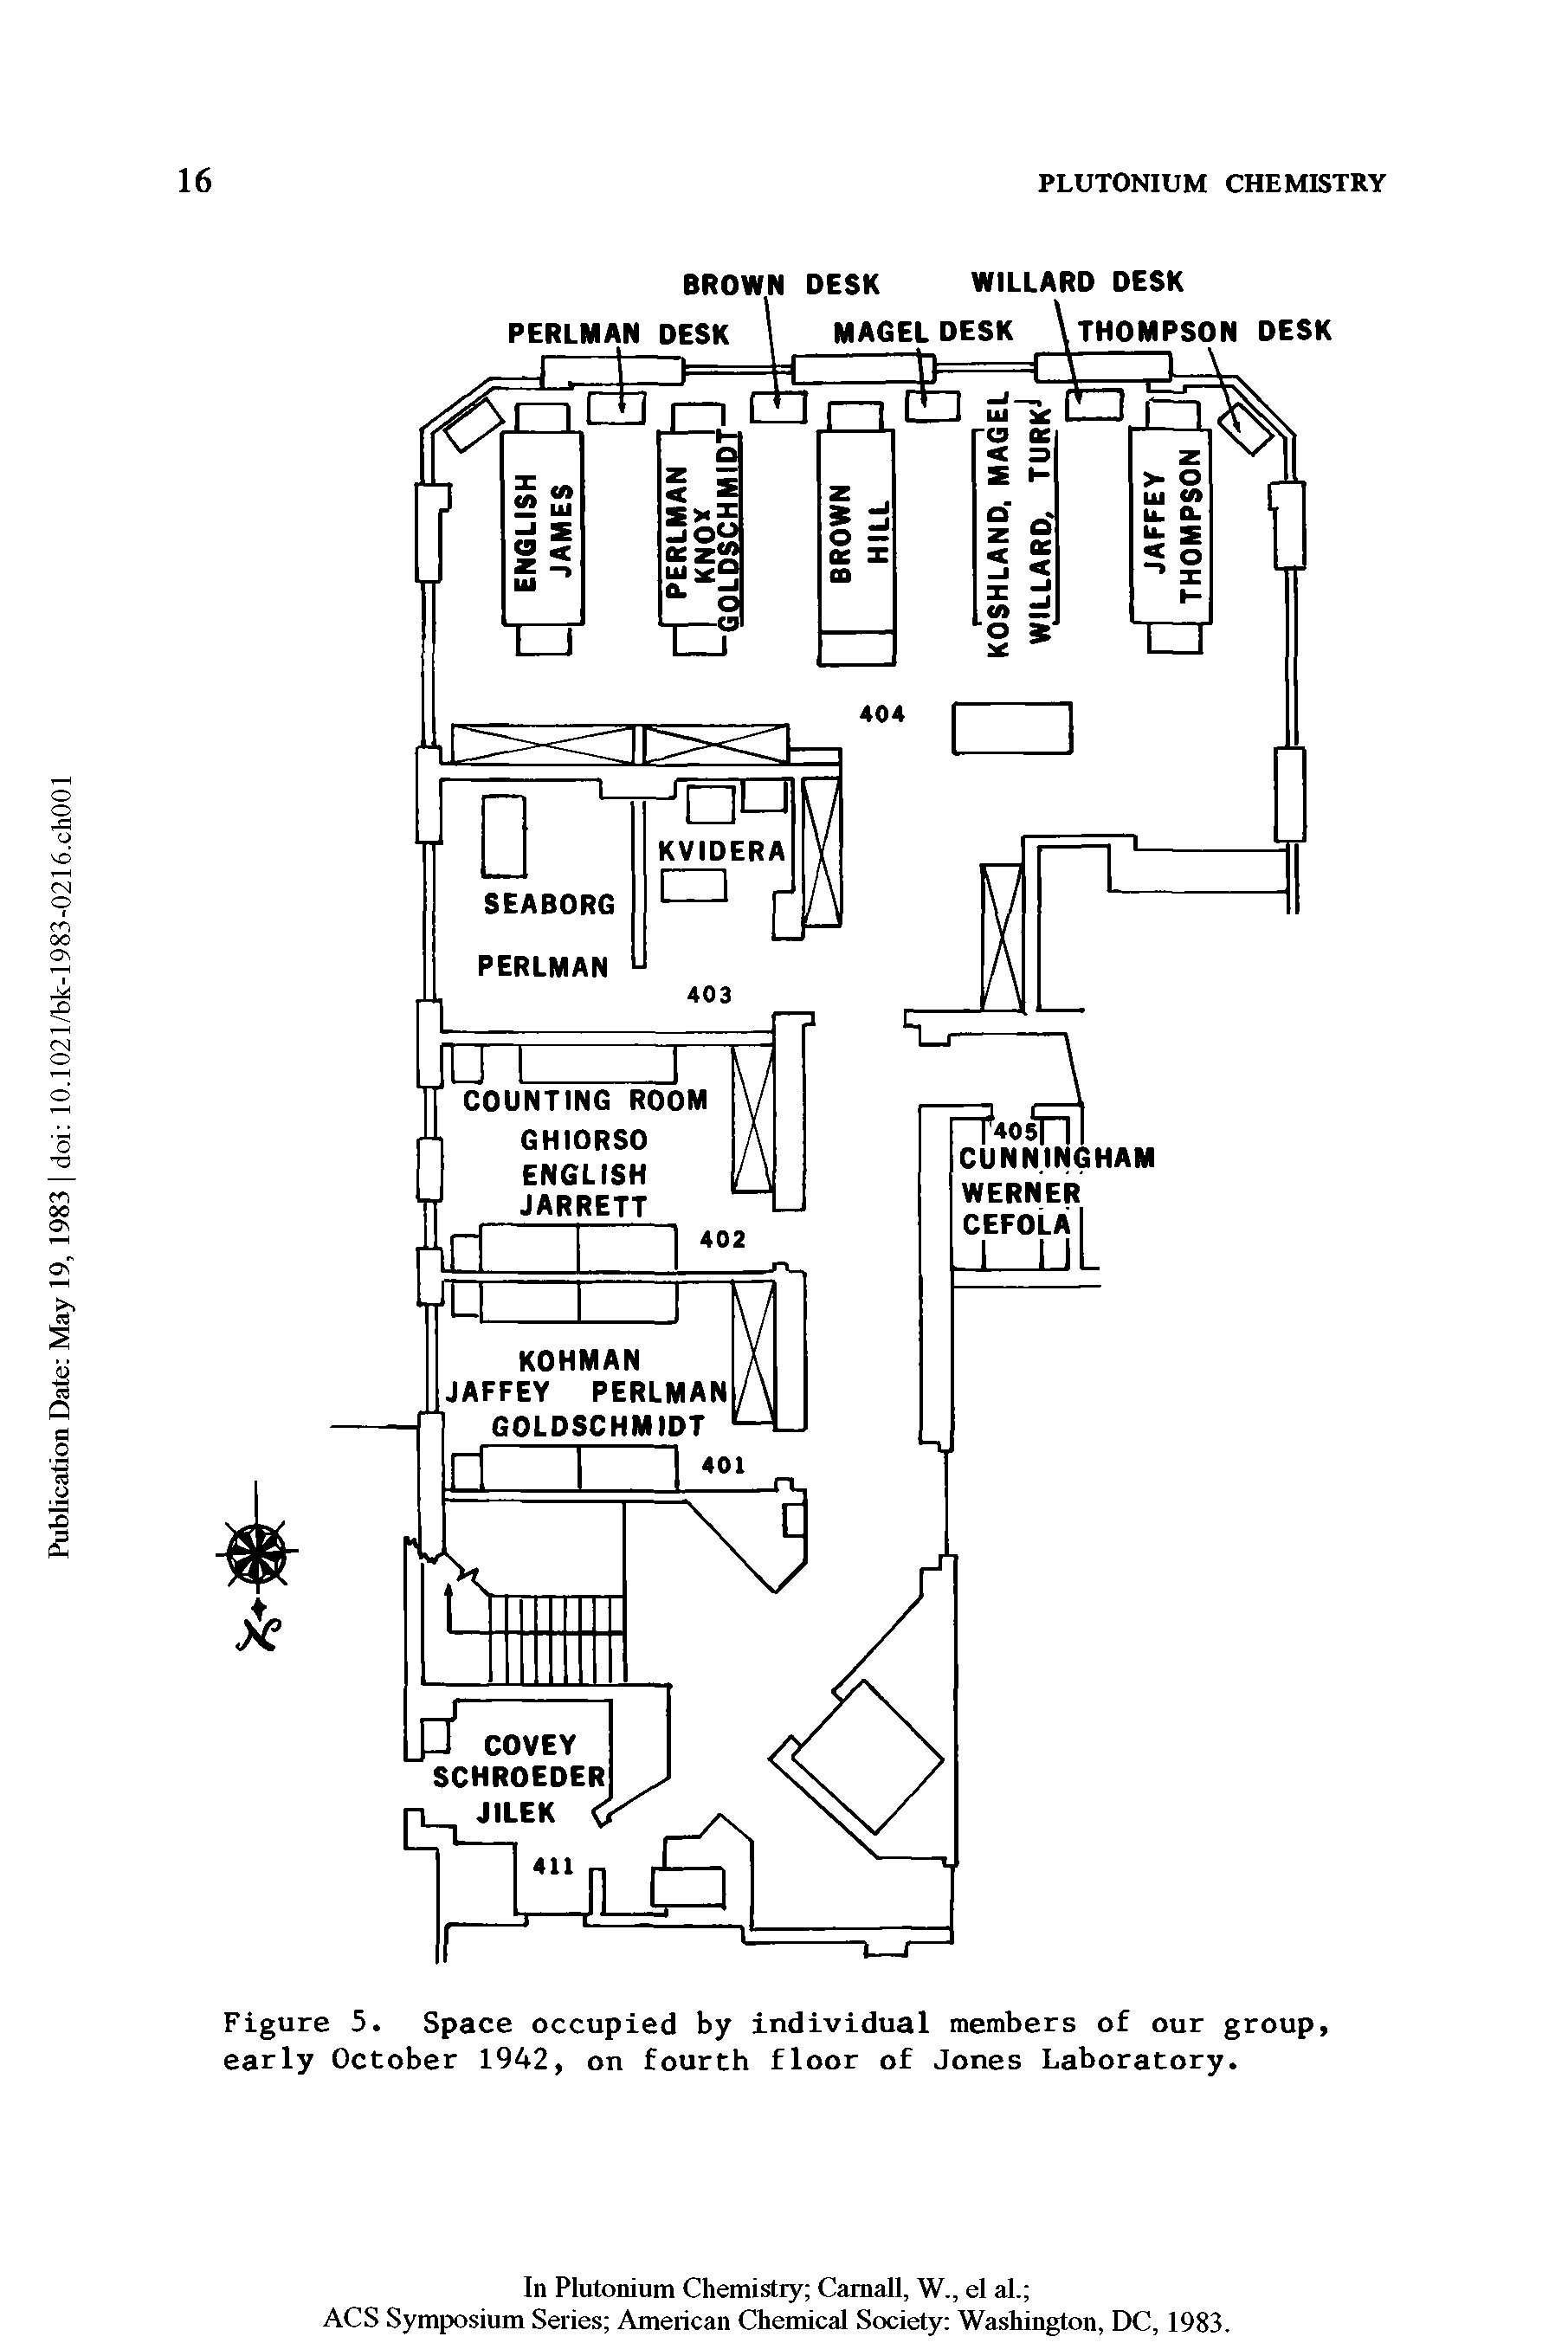 Figure 5. Space occupied by individual members of our group, early October 1942, on fourth floor of Jones Laboratory.